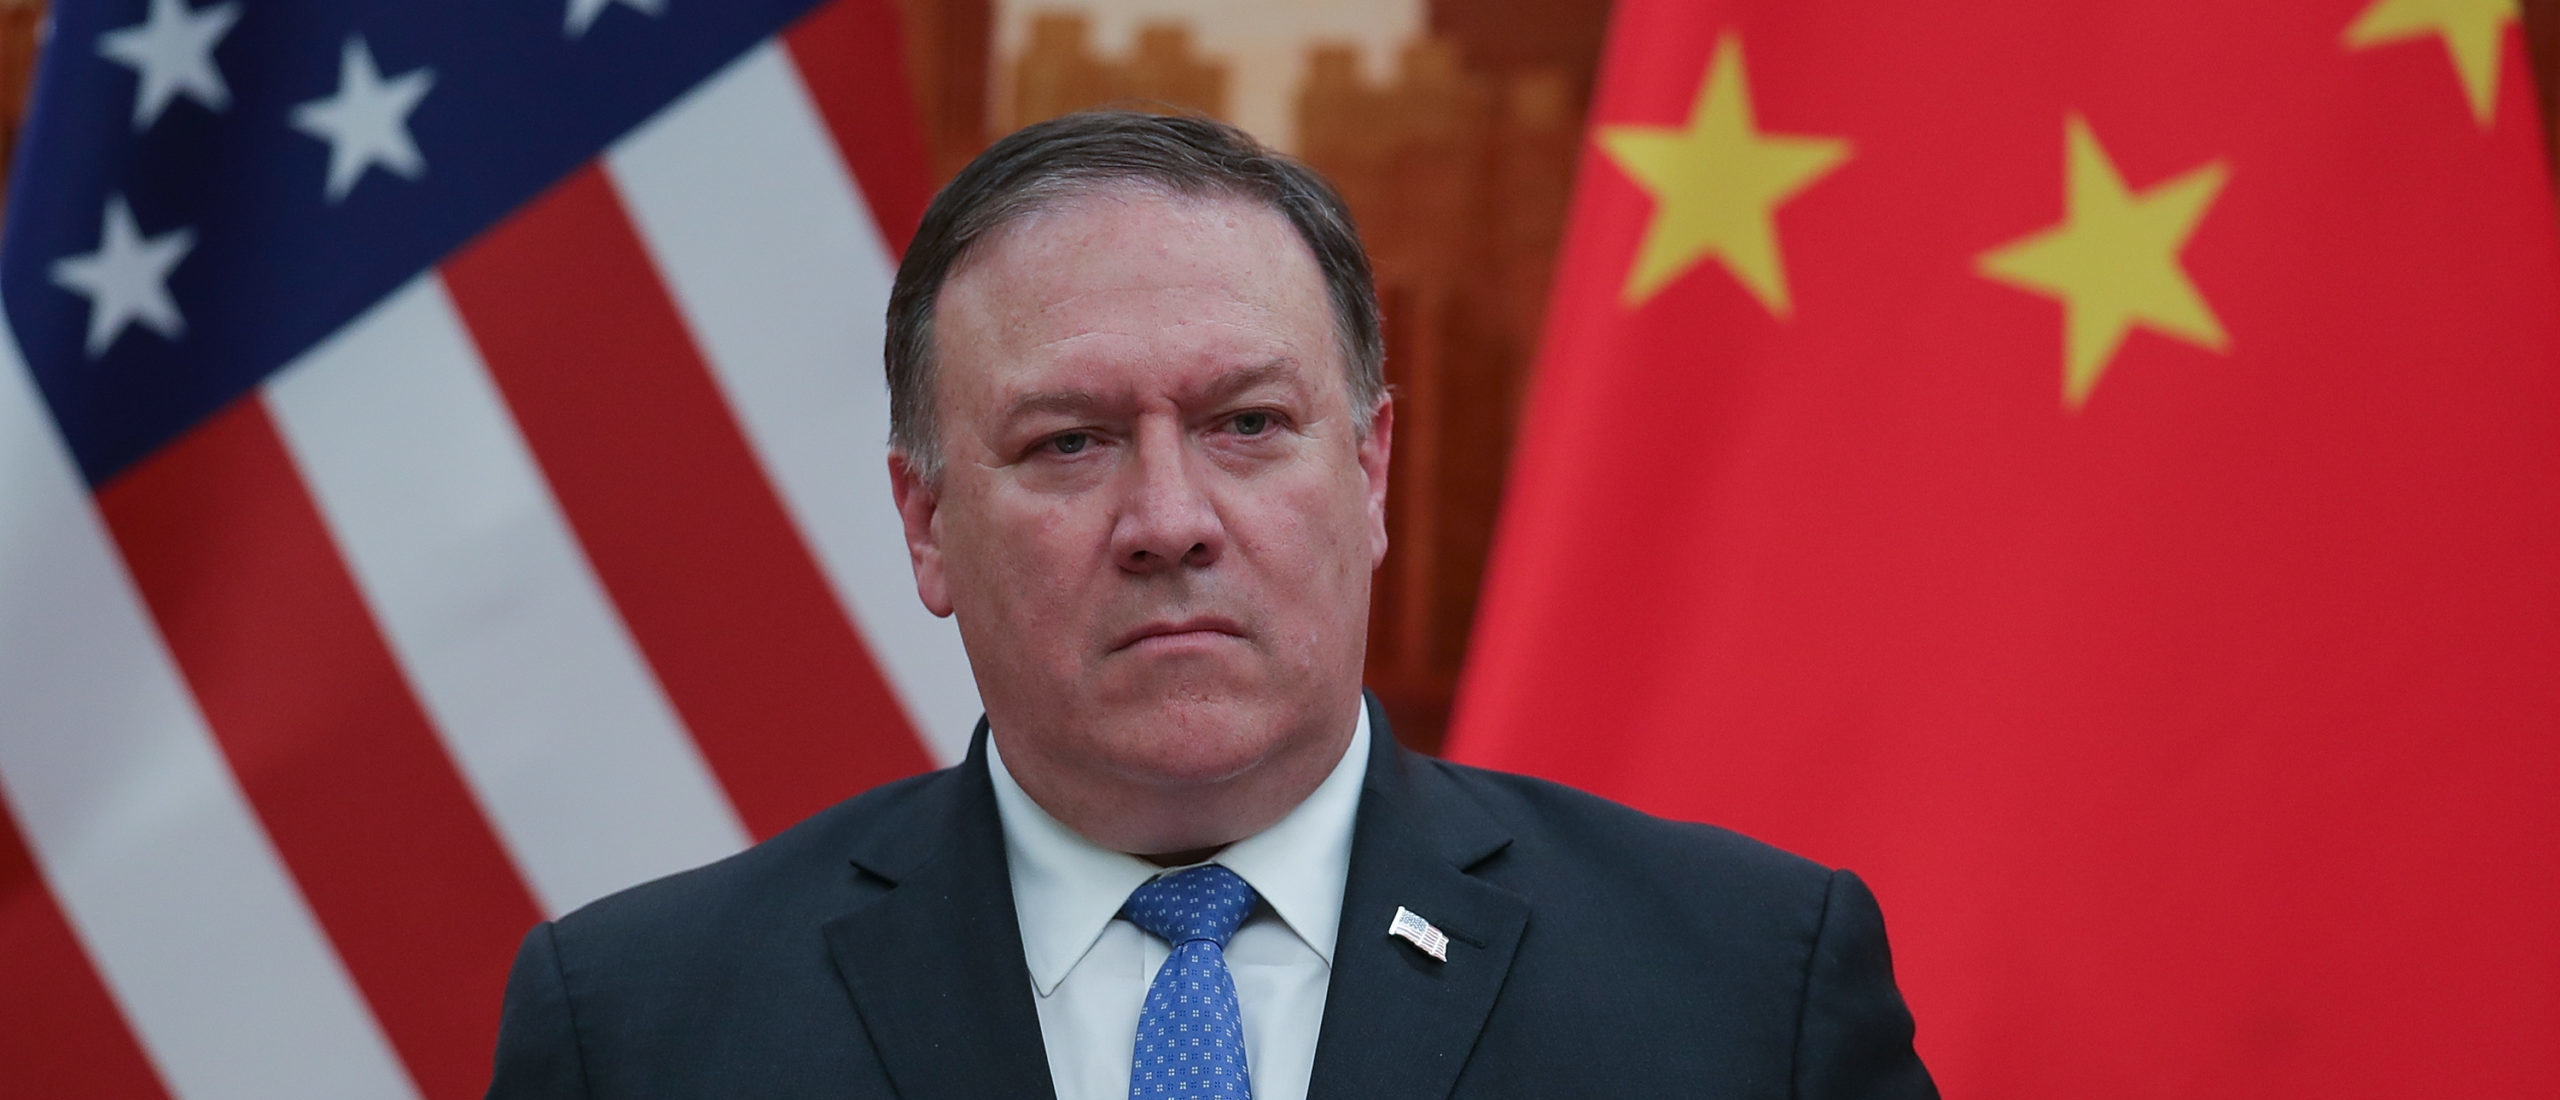 U.S. Secretary of State Mike Pompeo. (Photo by Lintao Zhang/Getty Images)